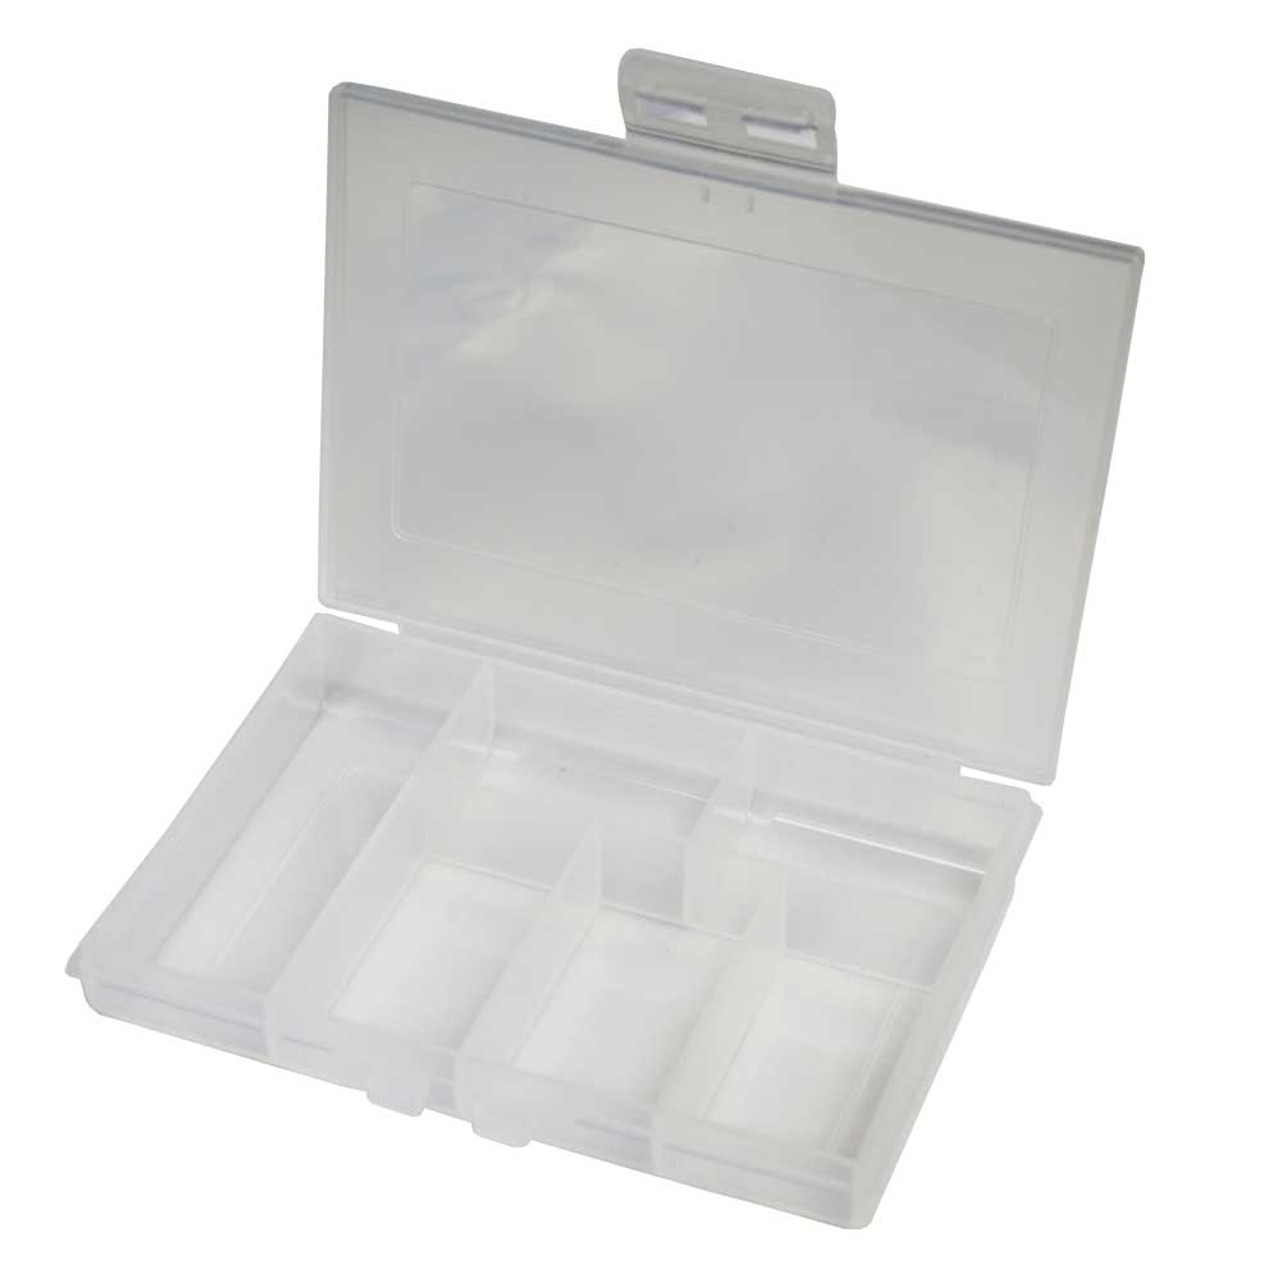 Plastic Craft Organizer Box with 6 Compartments 6 Kuwait